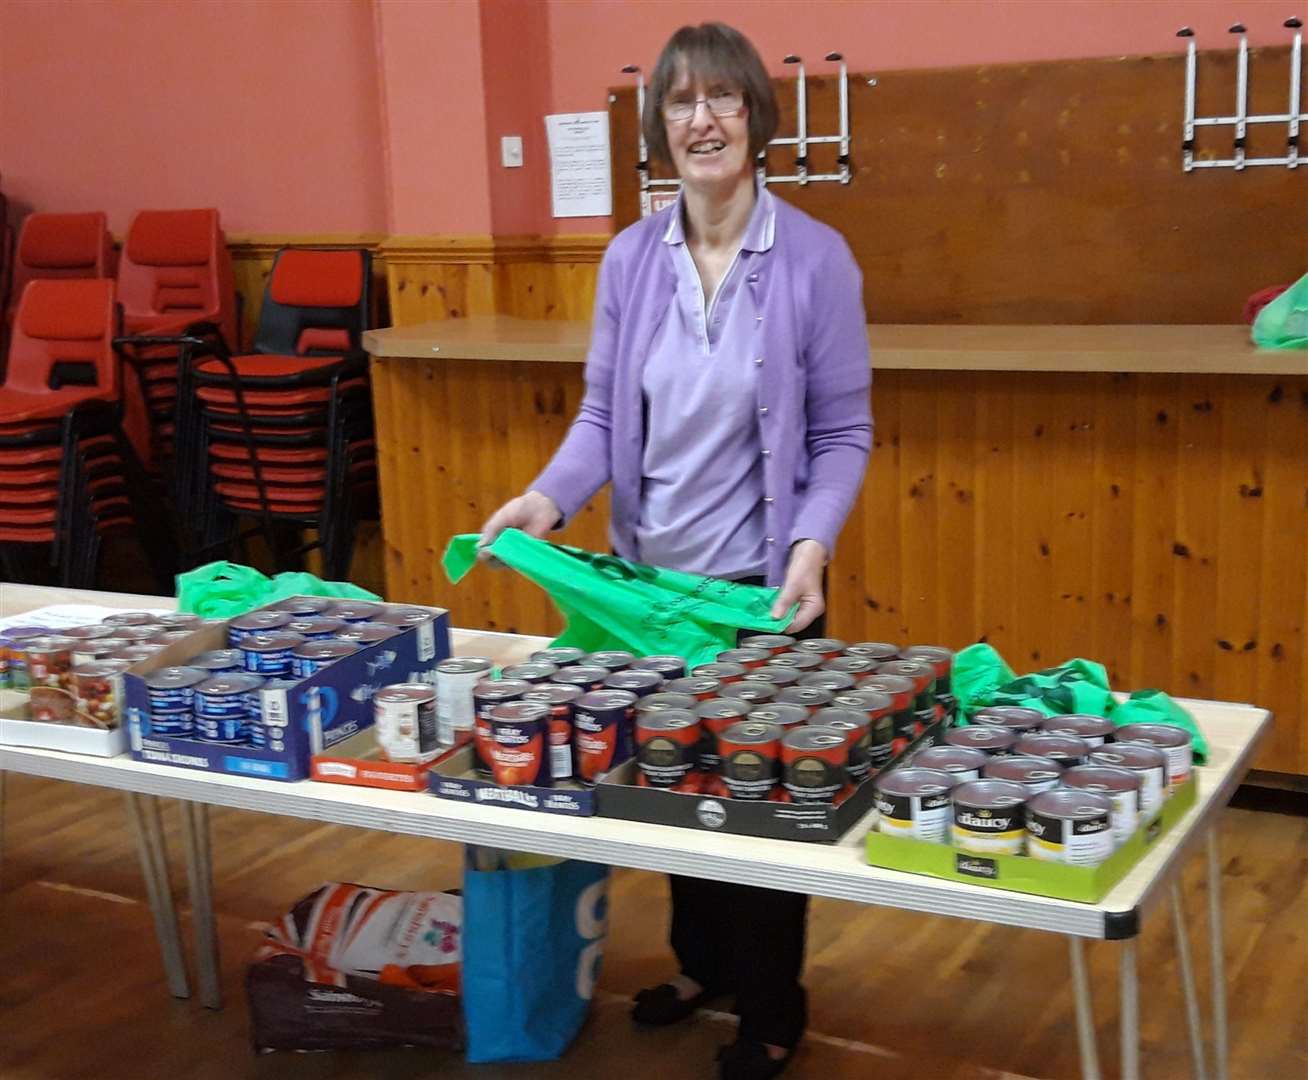 Care forum service manager Isobel Murray at the stall with the canned food donated by Cfine.